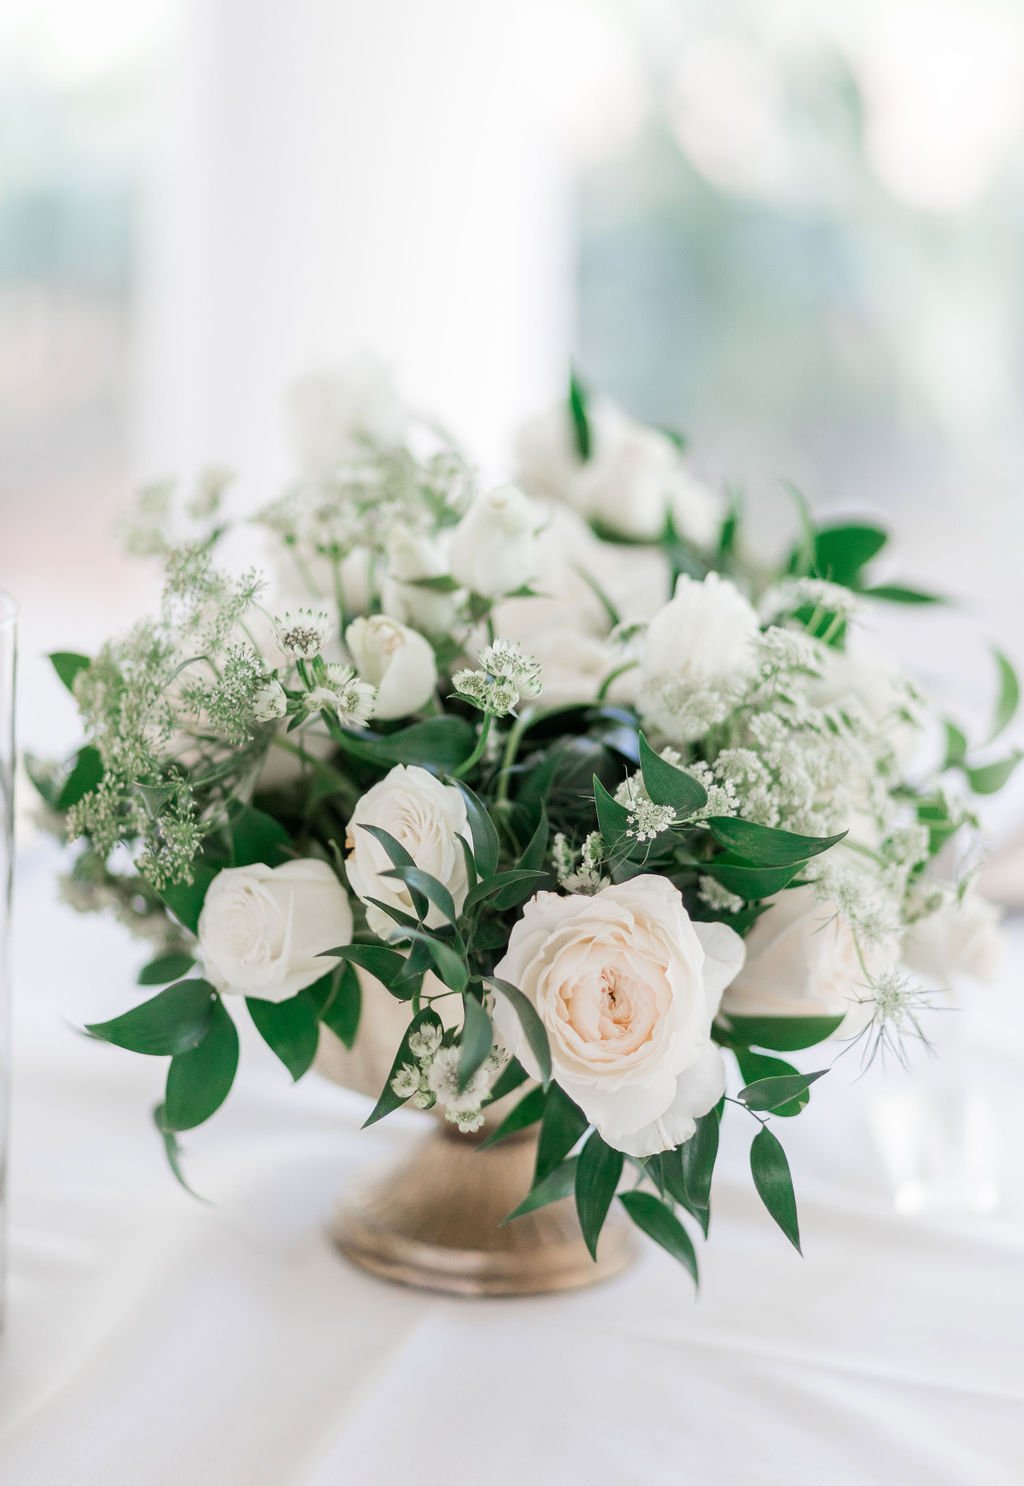 rachel-and-jarrods-classic-white-wedding-florals-designed-by-savannah-florist-ivory-and-beau-for-elegant-wedding-at-the-mackey-house-28.jpg